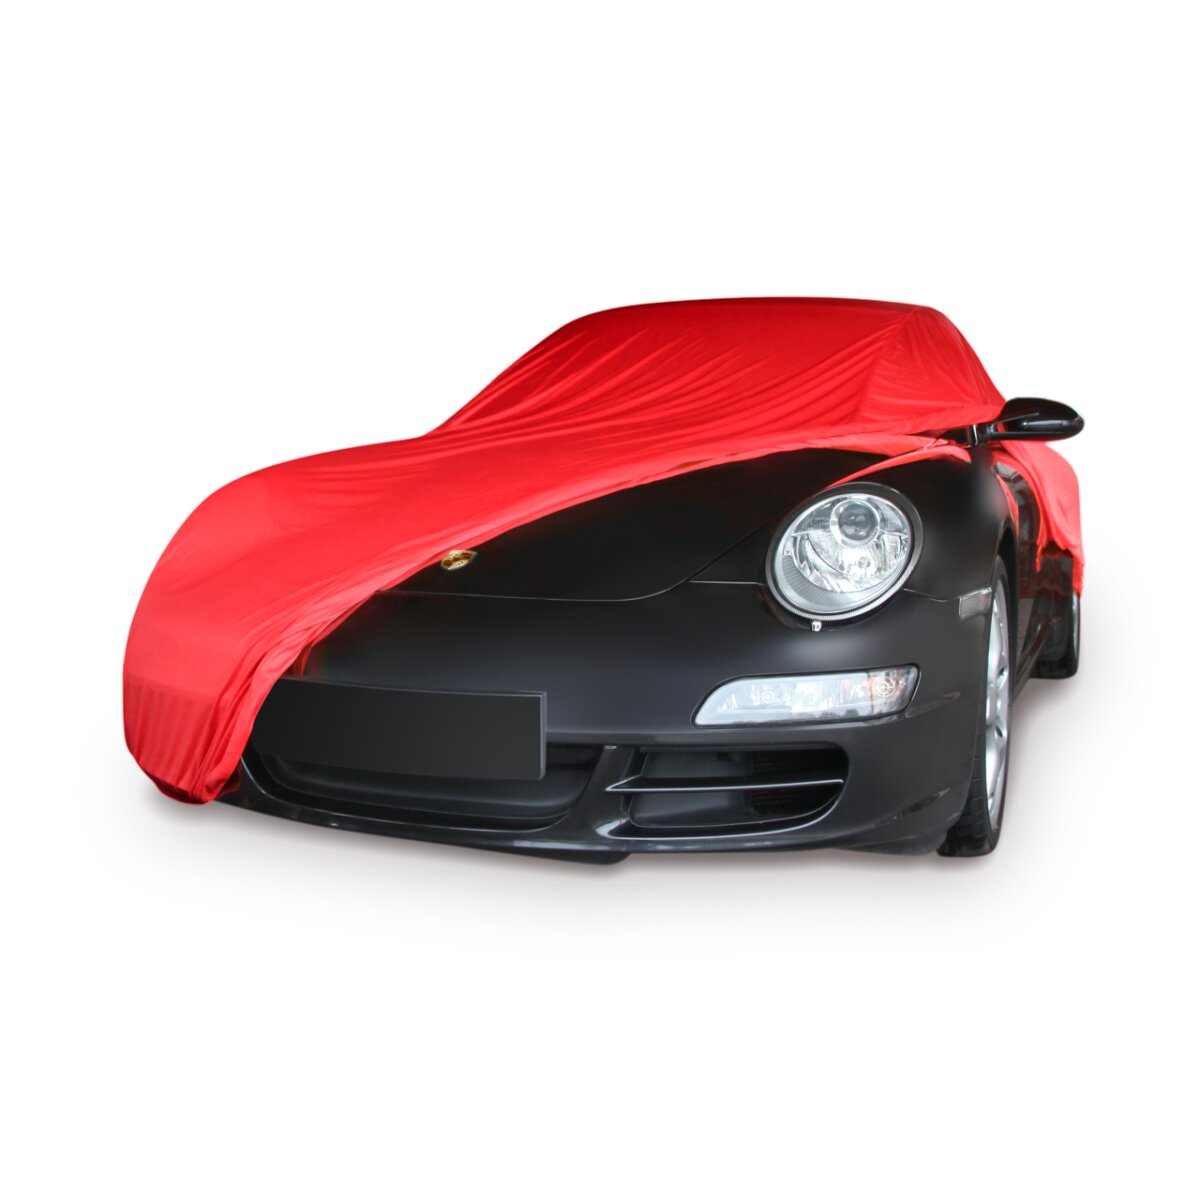 https://www.autoabdeckung.com/media/image/product/12493/lg/autoabdeckung-soft-indoor-car-cover-fuer-audi-s8-d2_1.jpg